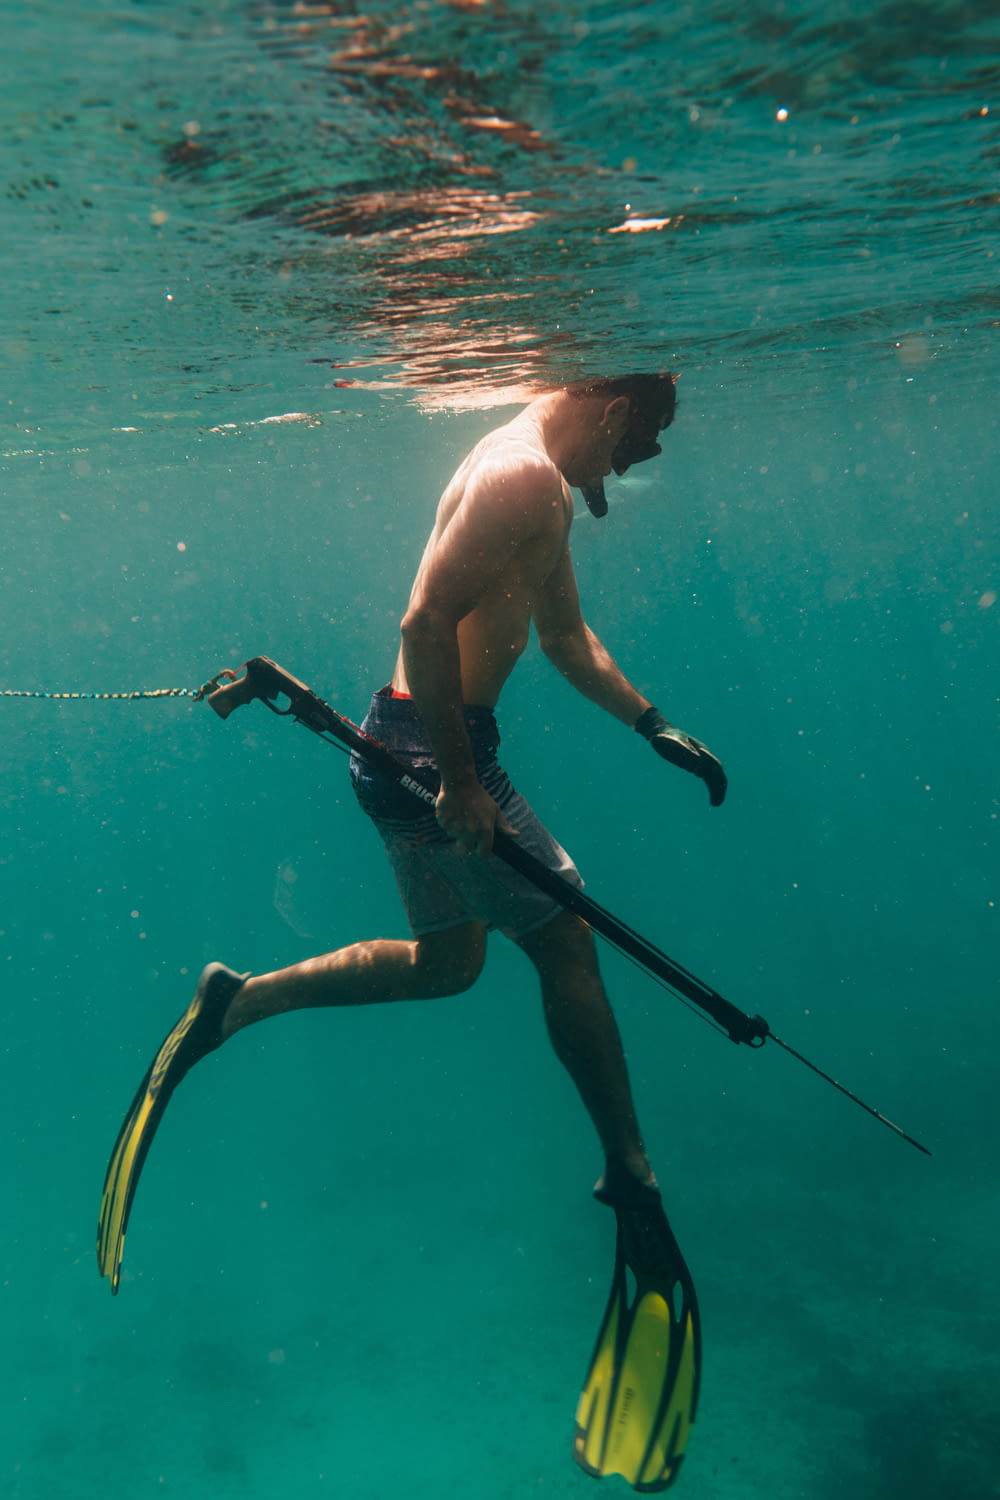 a man is swimming in the water with a pair of skis